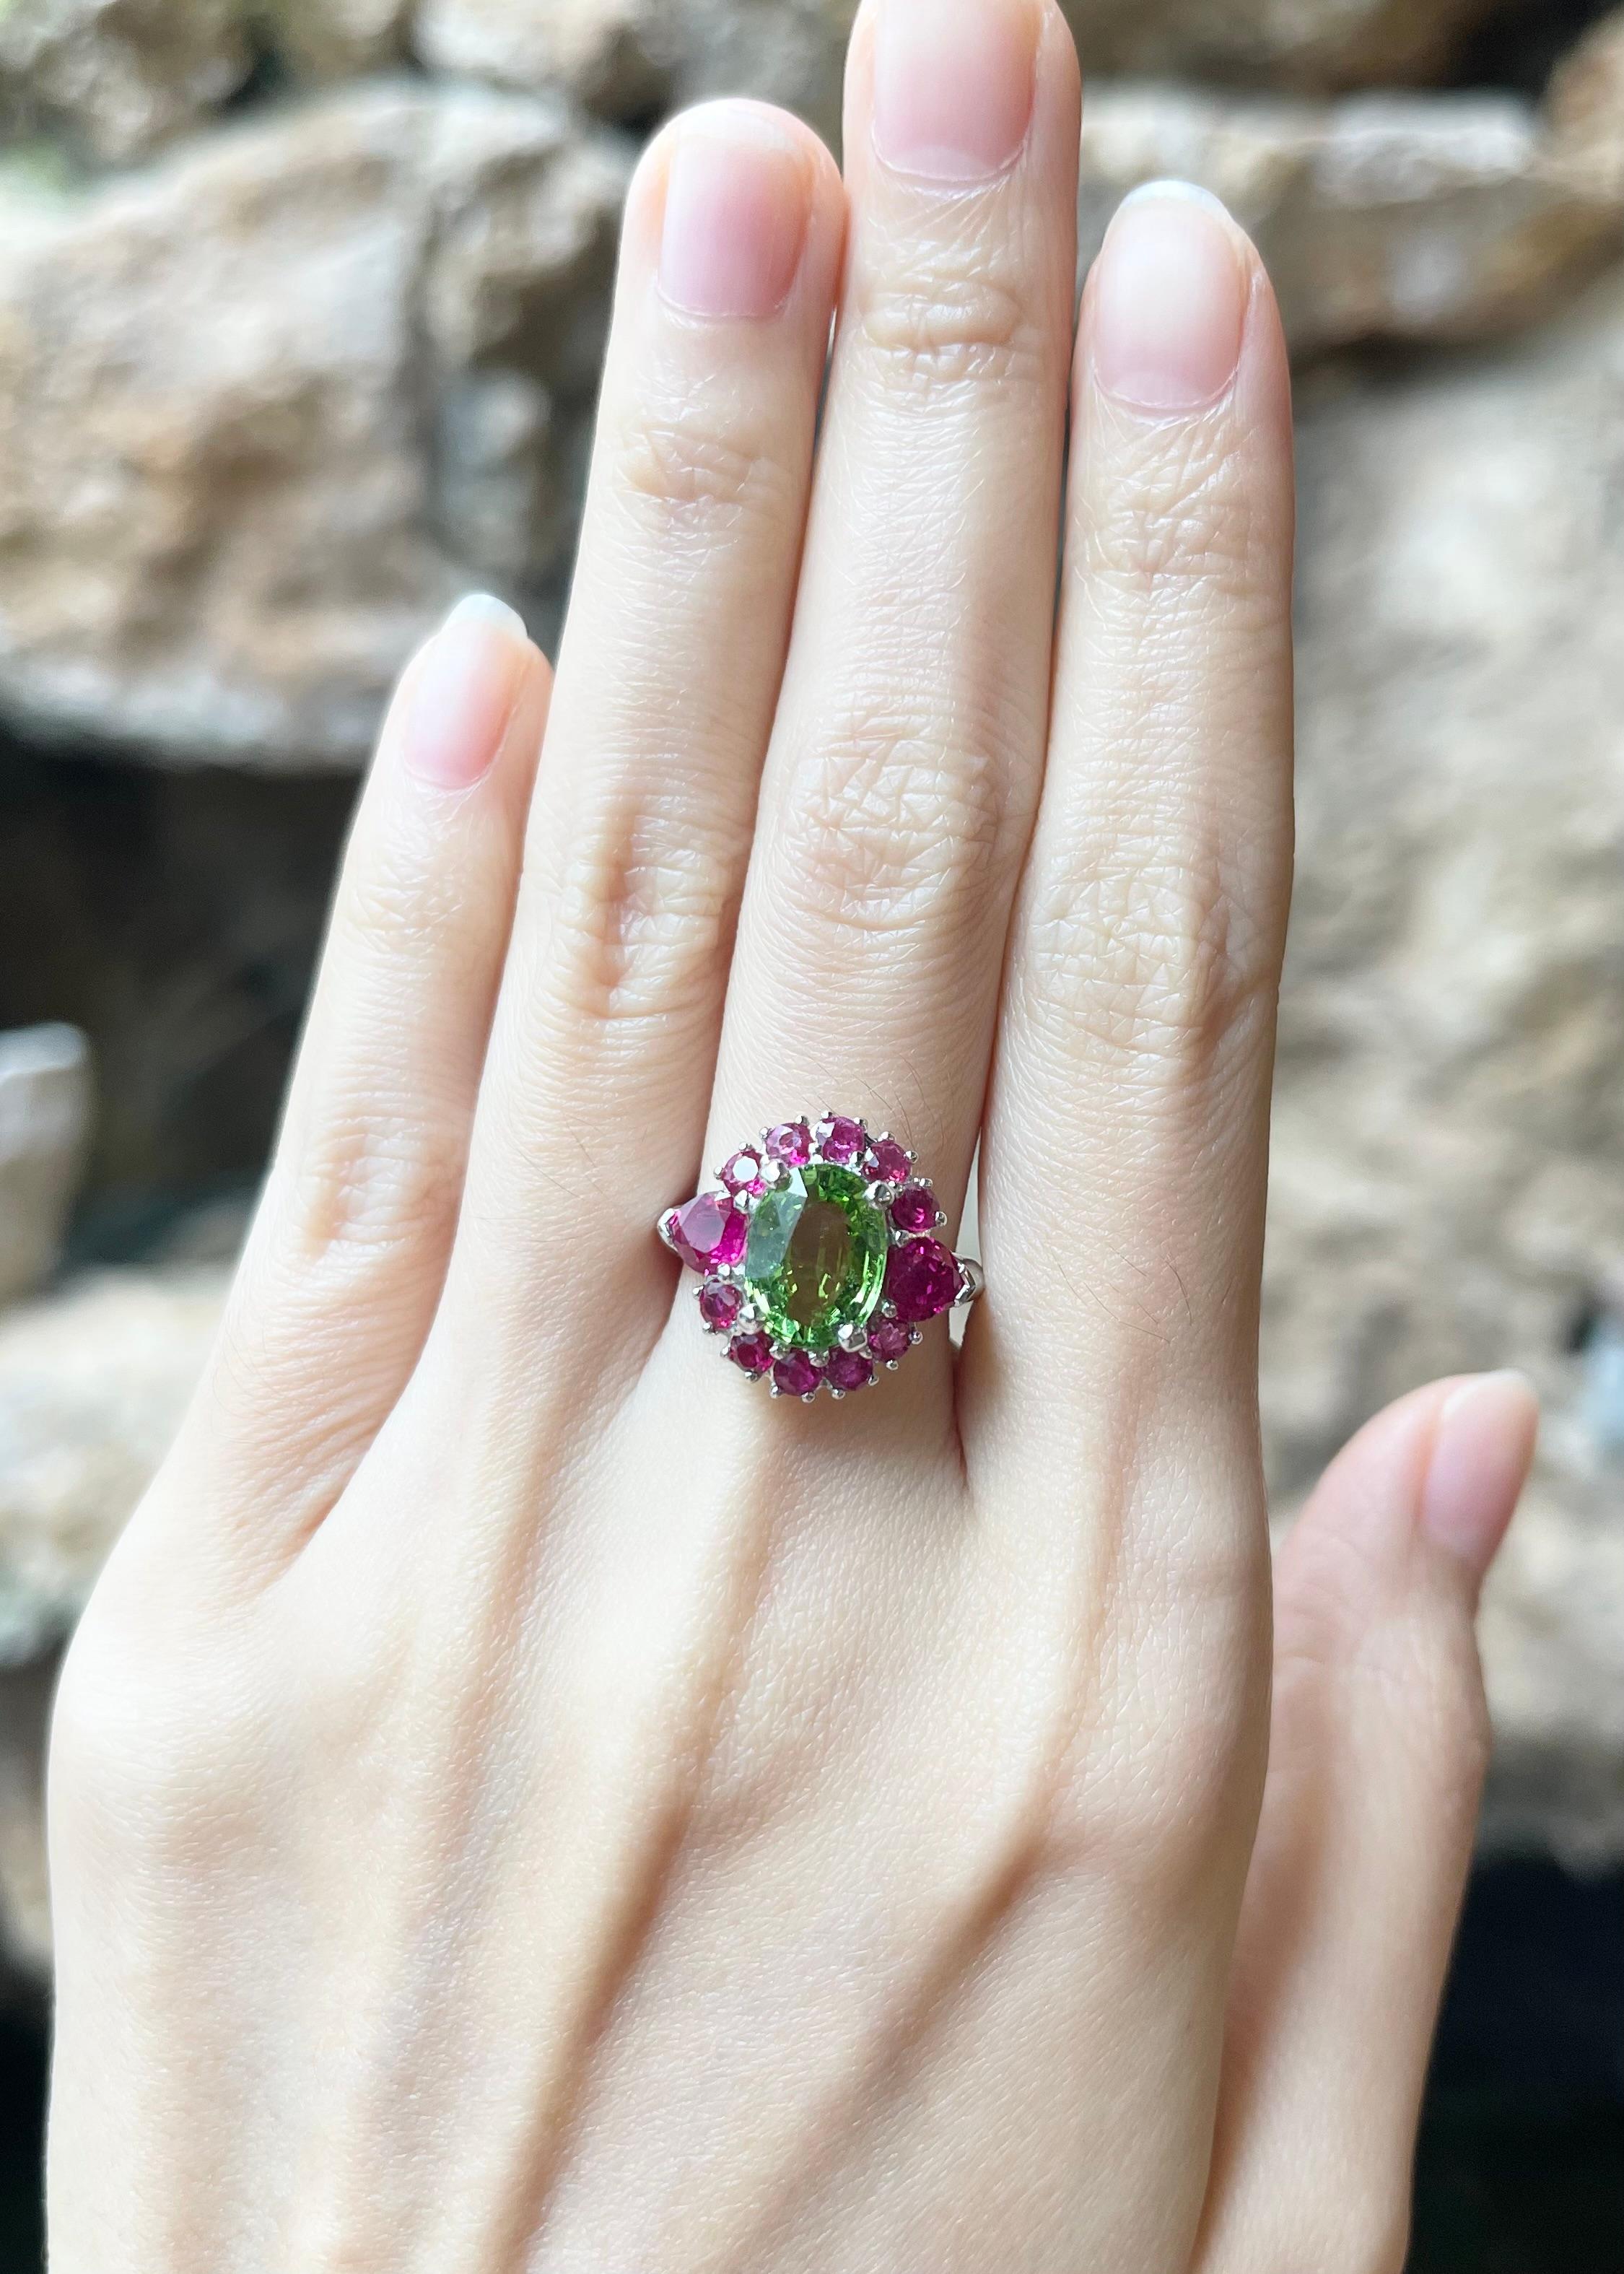 Green Tourmaline 2.40 carats with Ruby 2.0 carats Ring set in Platinum 950 Settings

Width:  1.6 cm 
Length: 1.5 cm
Ring Size: 53
Total Weight: 7.66 grams

